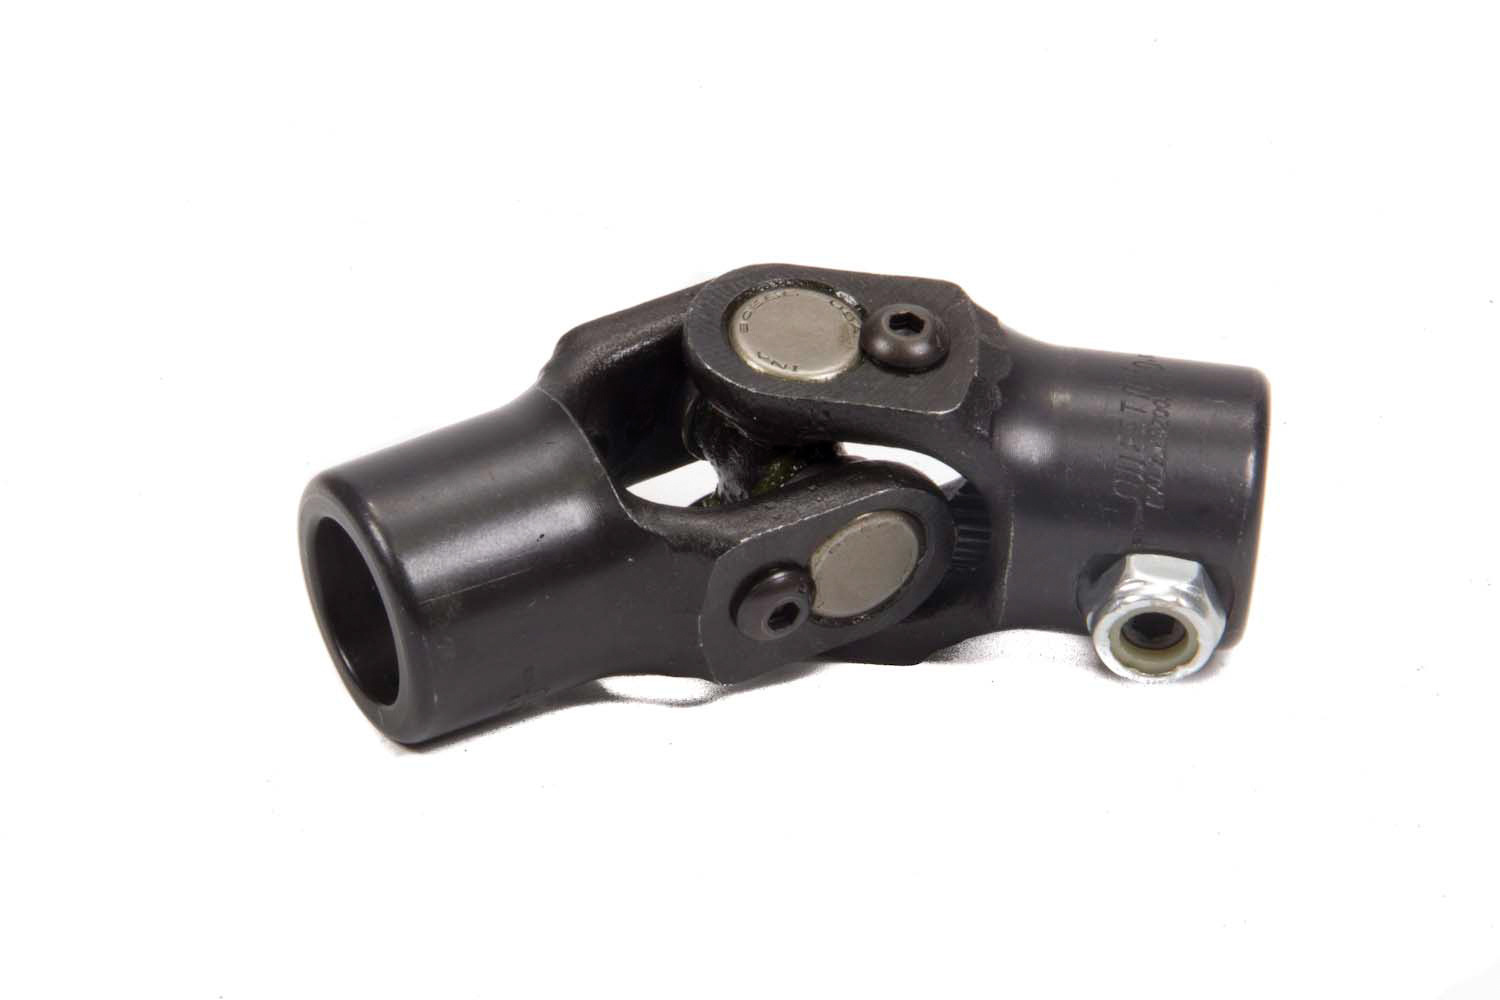 Steering Universal Joint - Single Joint - 3/4 in Smooth Bore to 5/8 in 36 Spline - Steel - Black Paint - Each